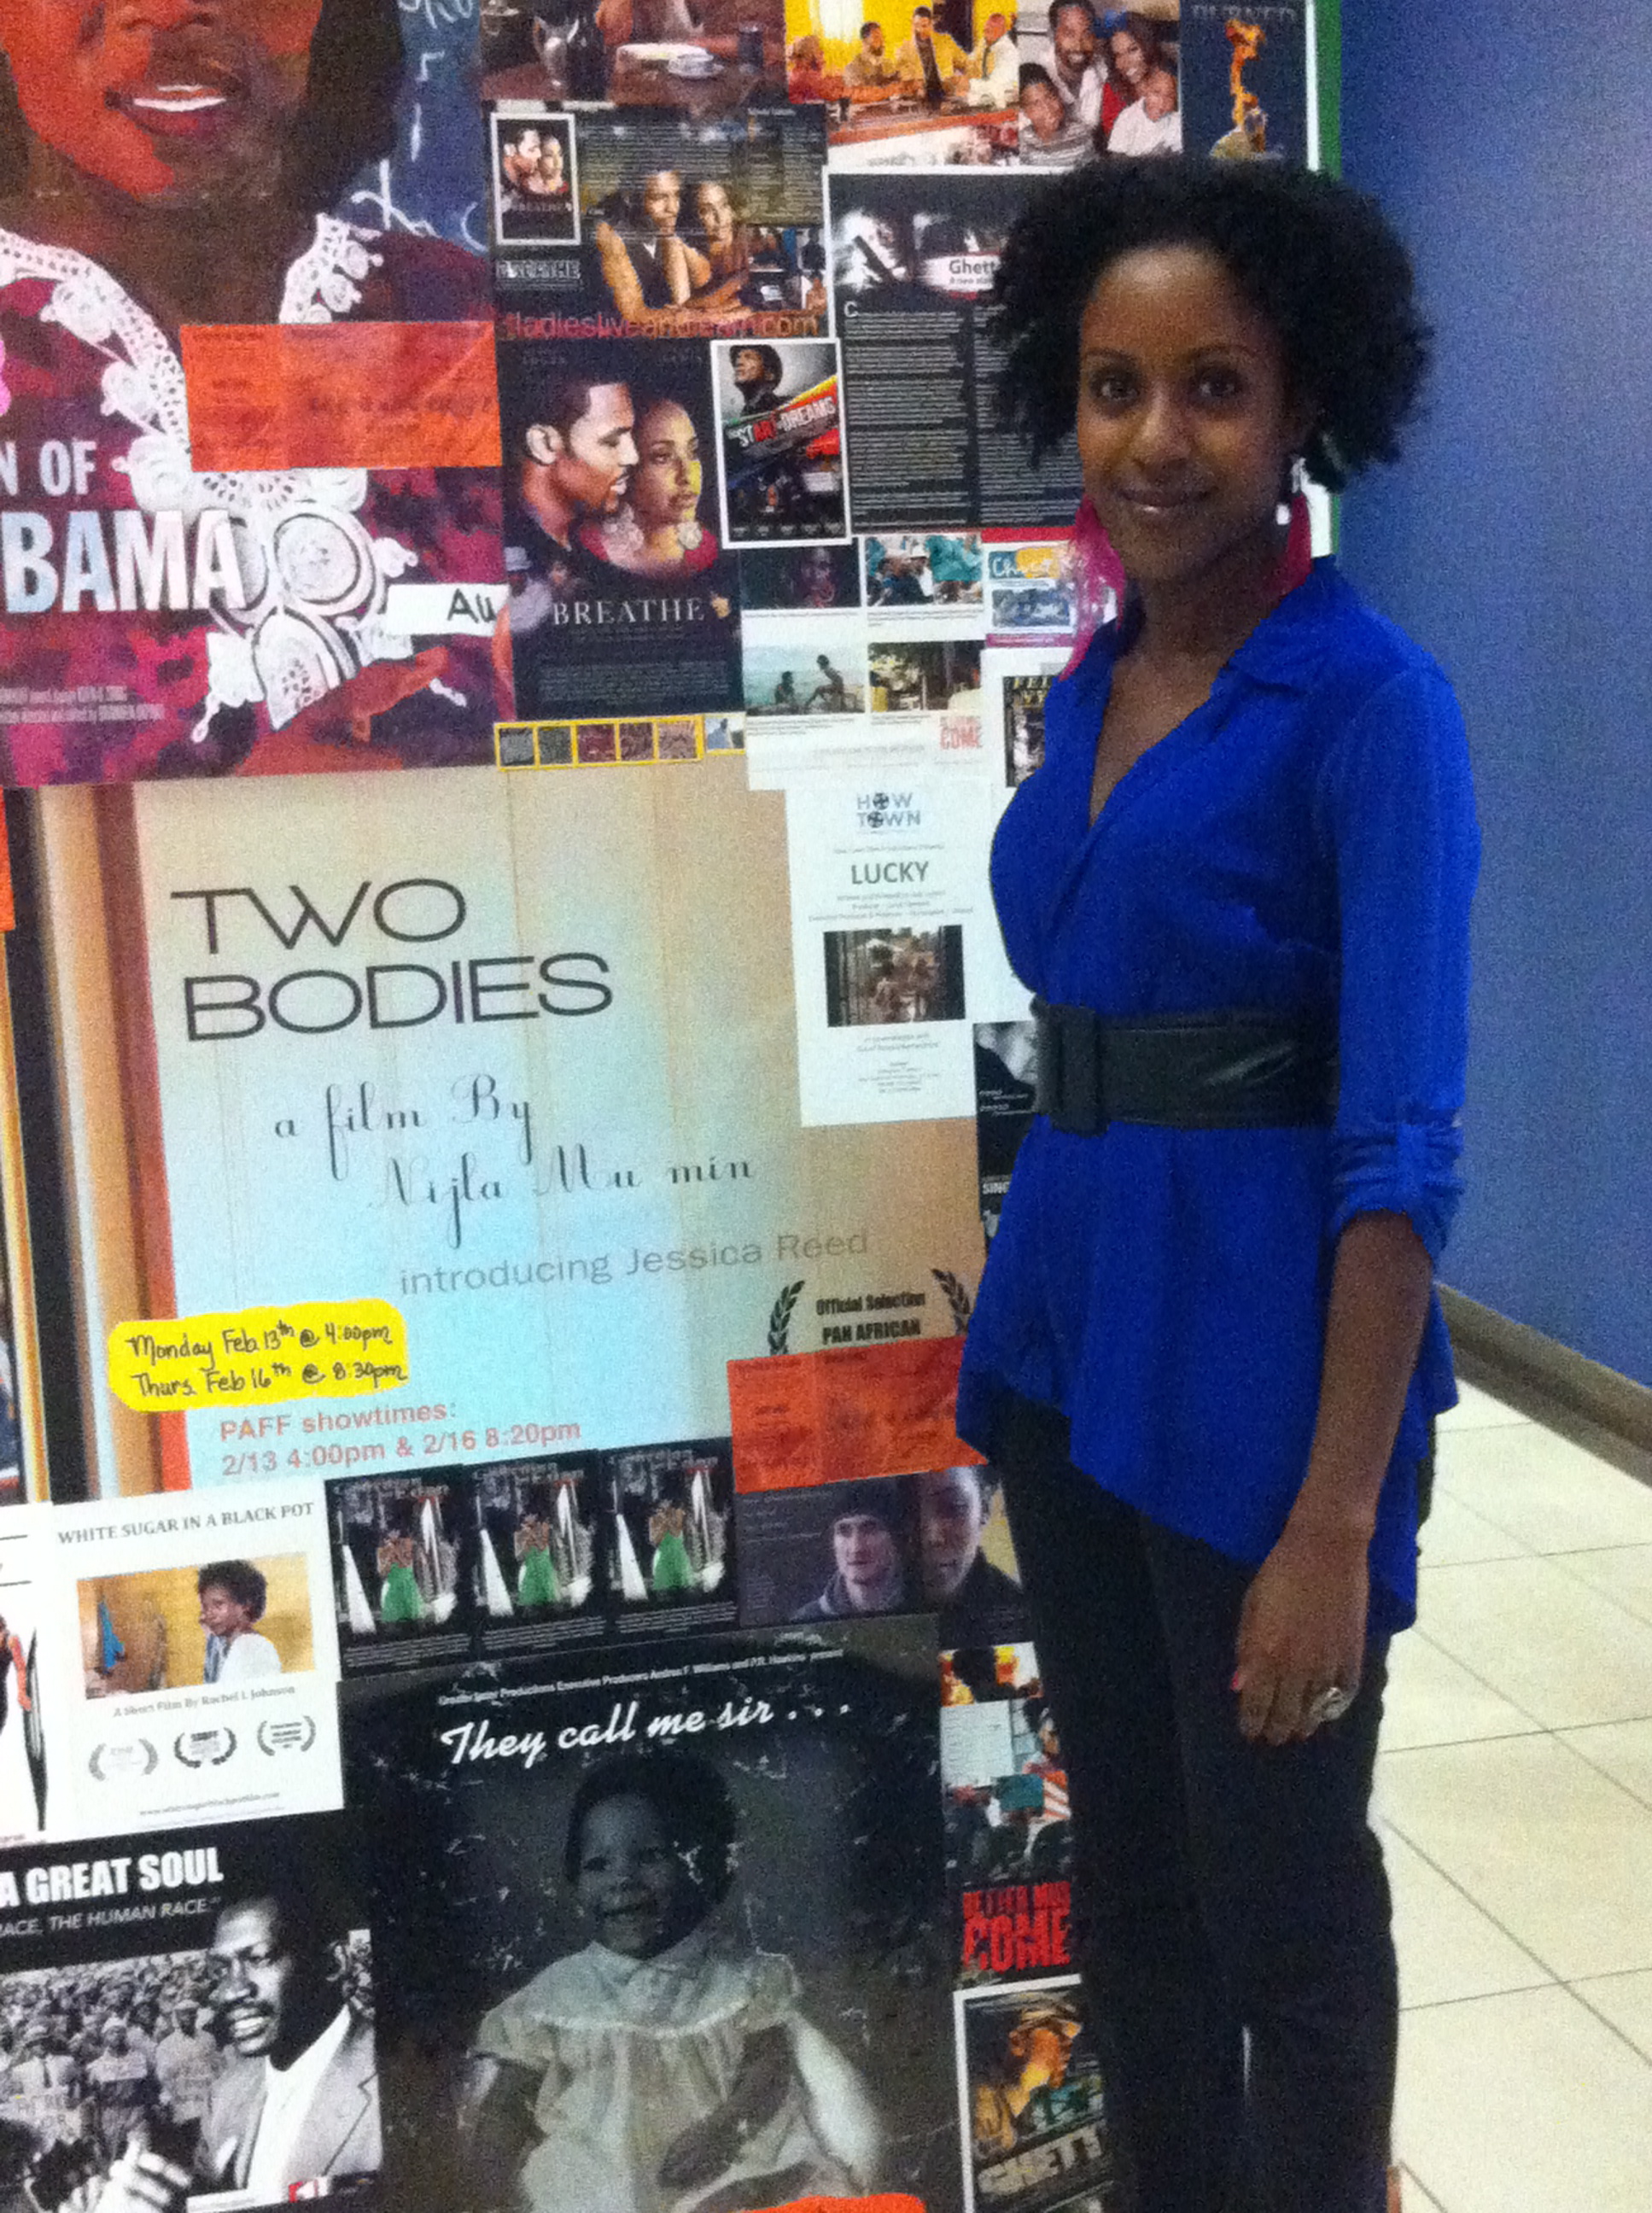 Two Bodies screening at the 2012 Pan African Film Festival